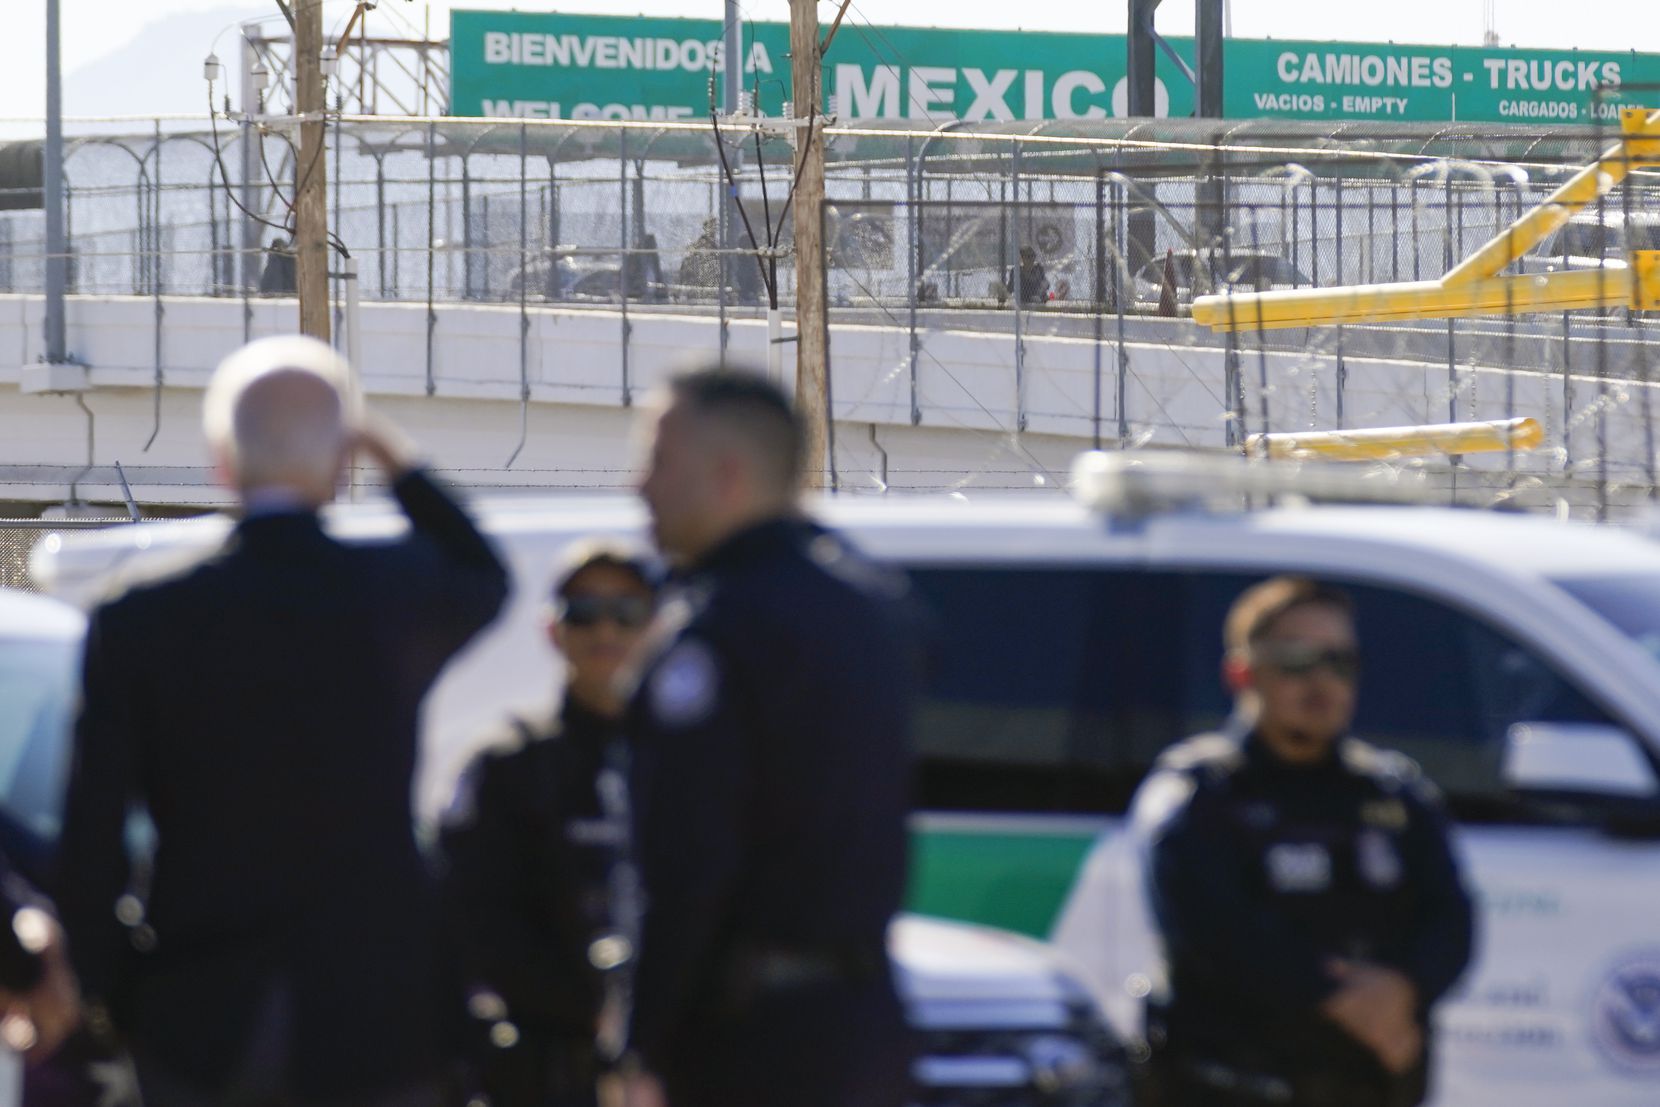 President Joe Biden, left, looks towards a large "Welcome to Mexico" sign that is hung over...